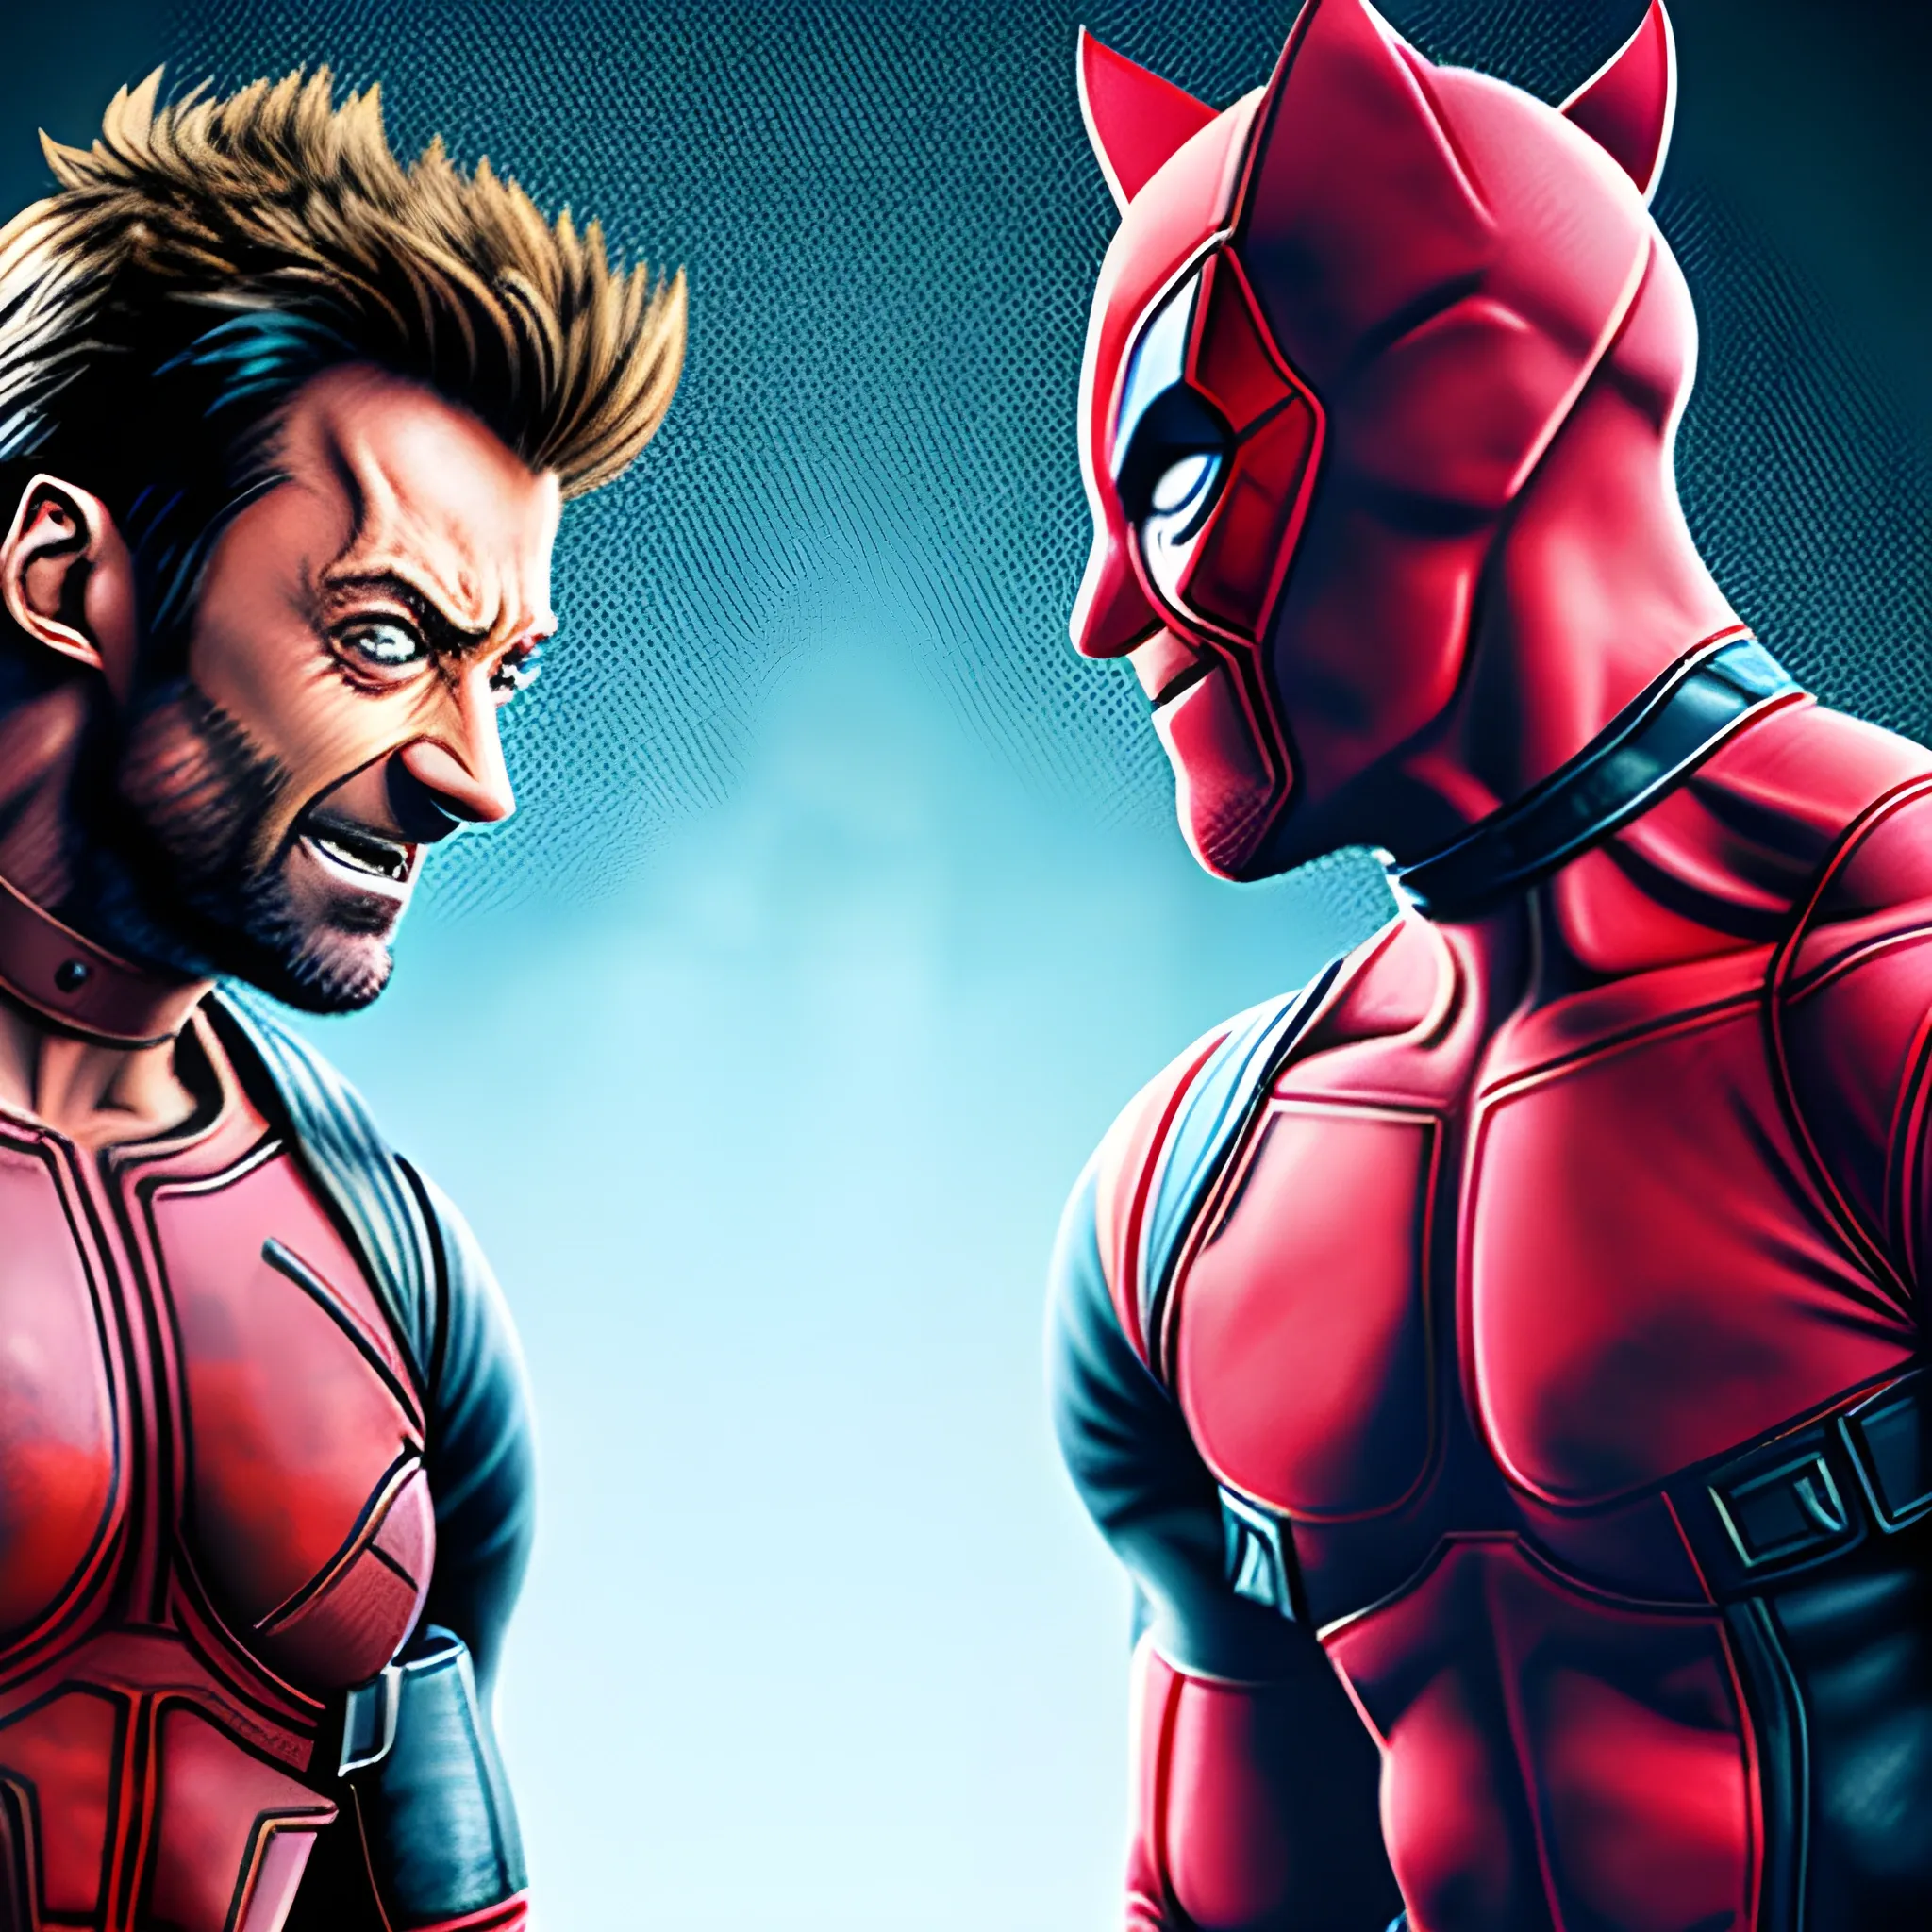 Hugh Jackman as Wolverine fighthing with deadpool,  anime style, 3D